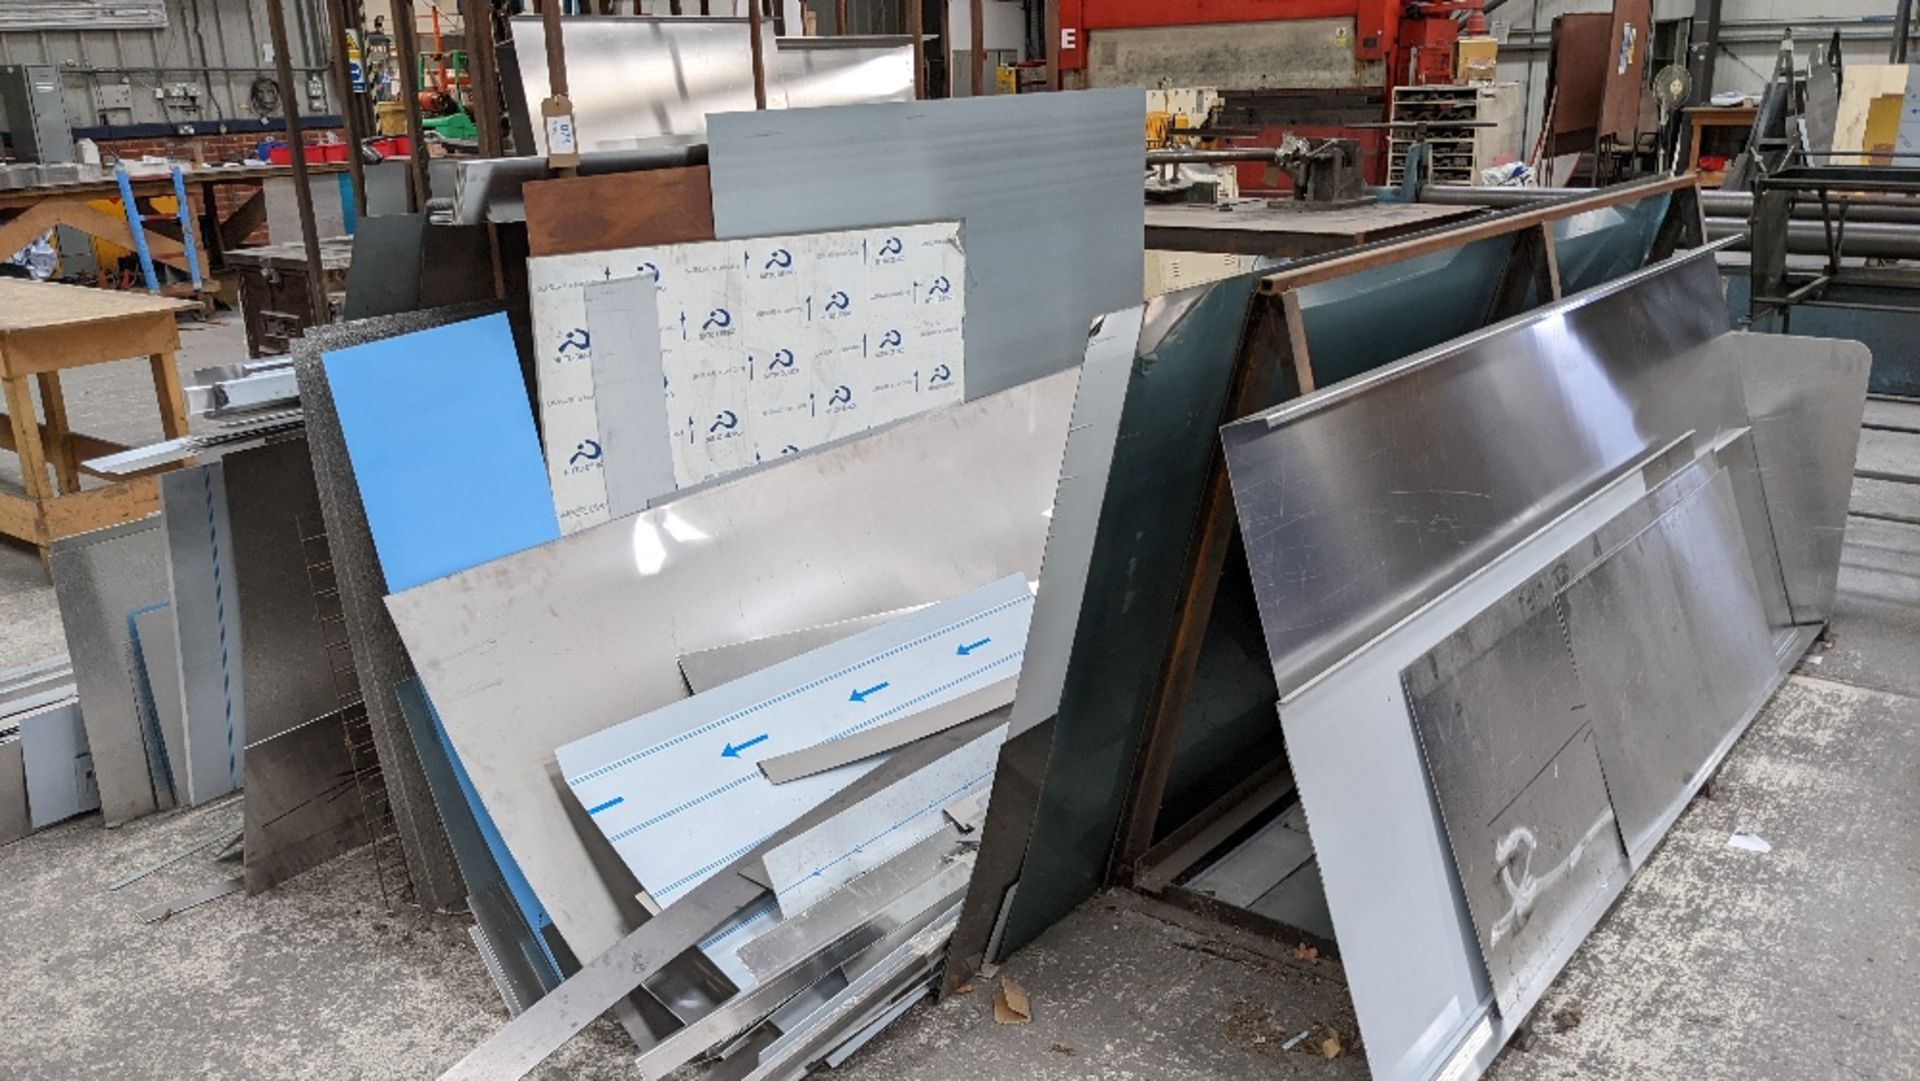 Contents of rack: Quantity Stainless steel & aluminium sheet offcuts - Image 7 of 7